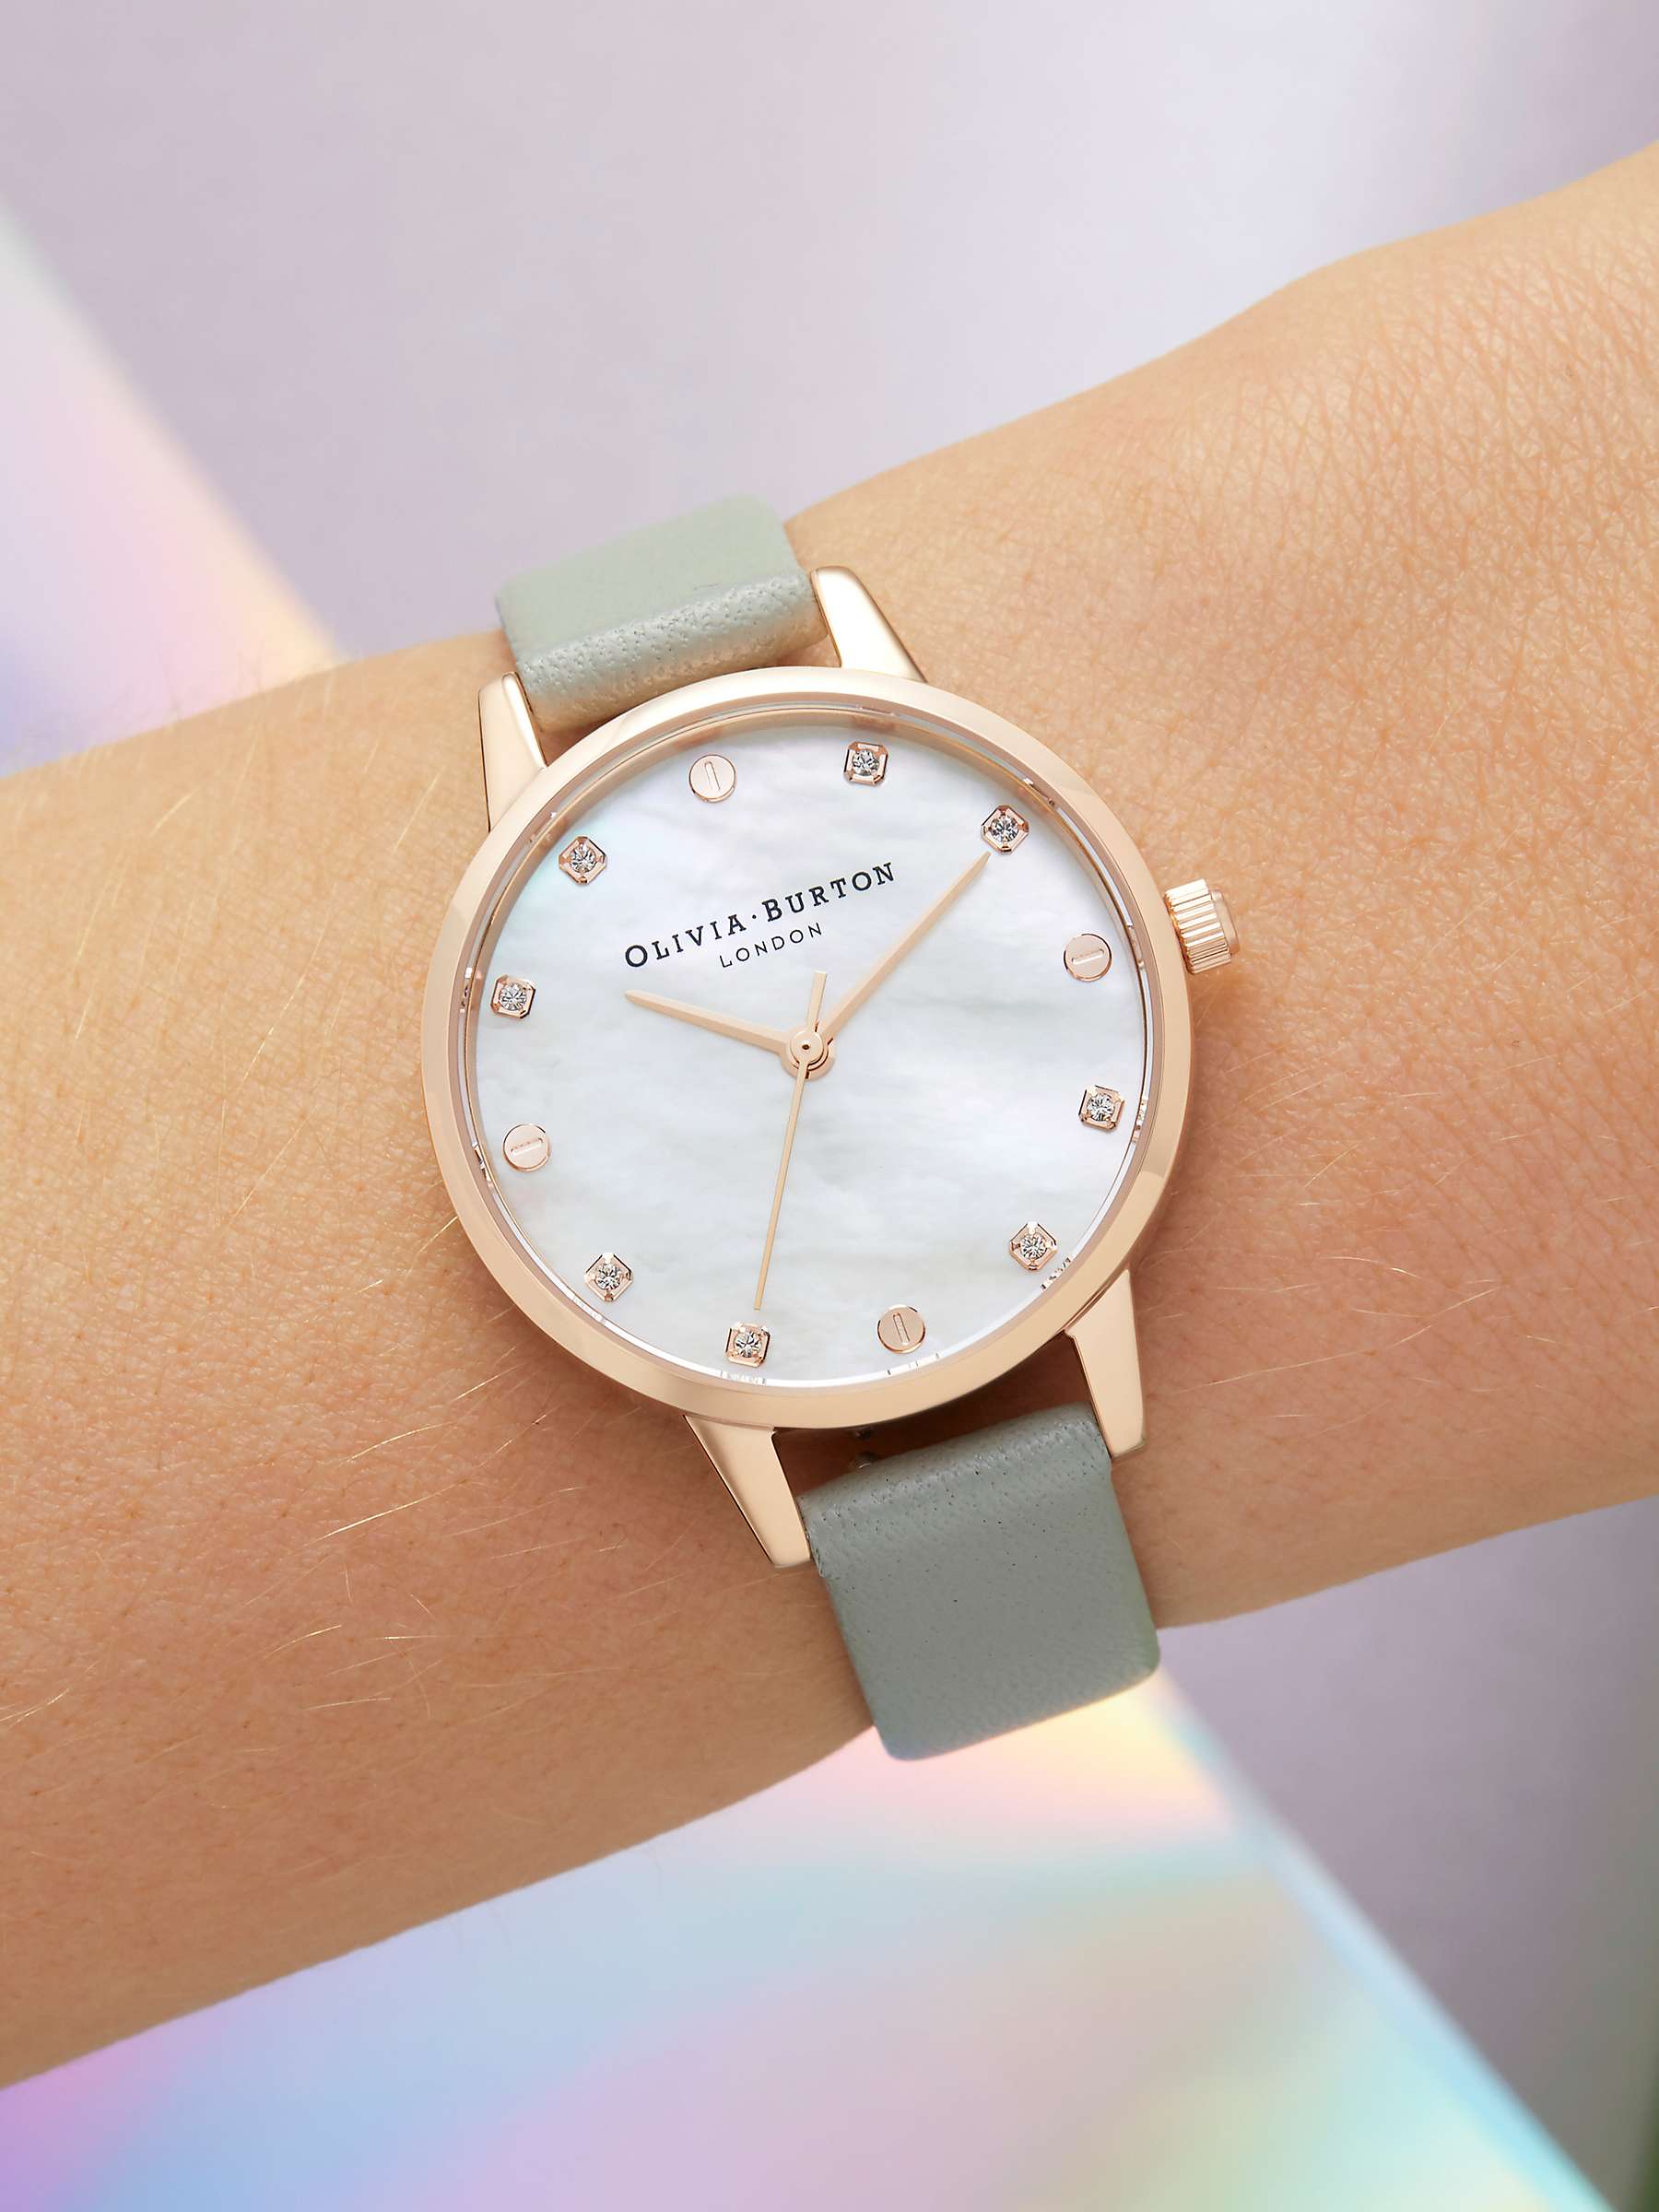 Buy Olivia Burton OB16SE12 Women's Classic Leather Strap Watch, Grey/Mother of Pearl Online at johnlewis.com